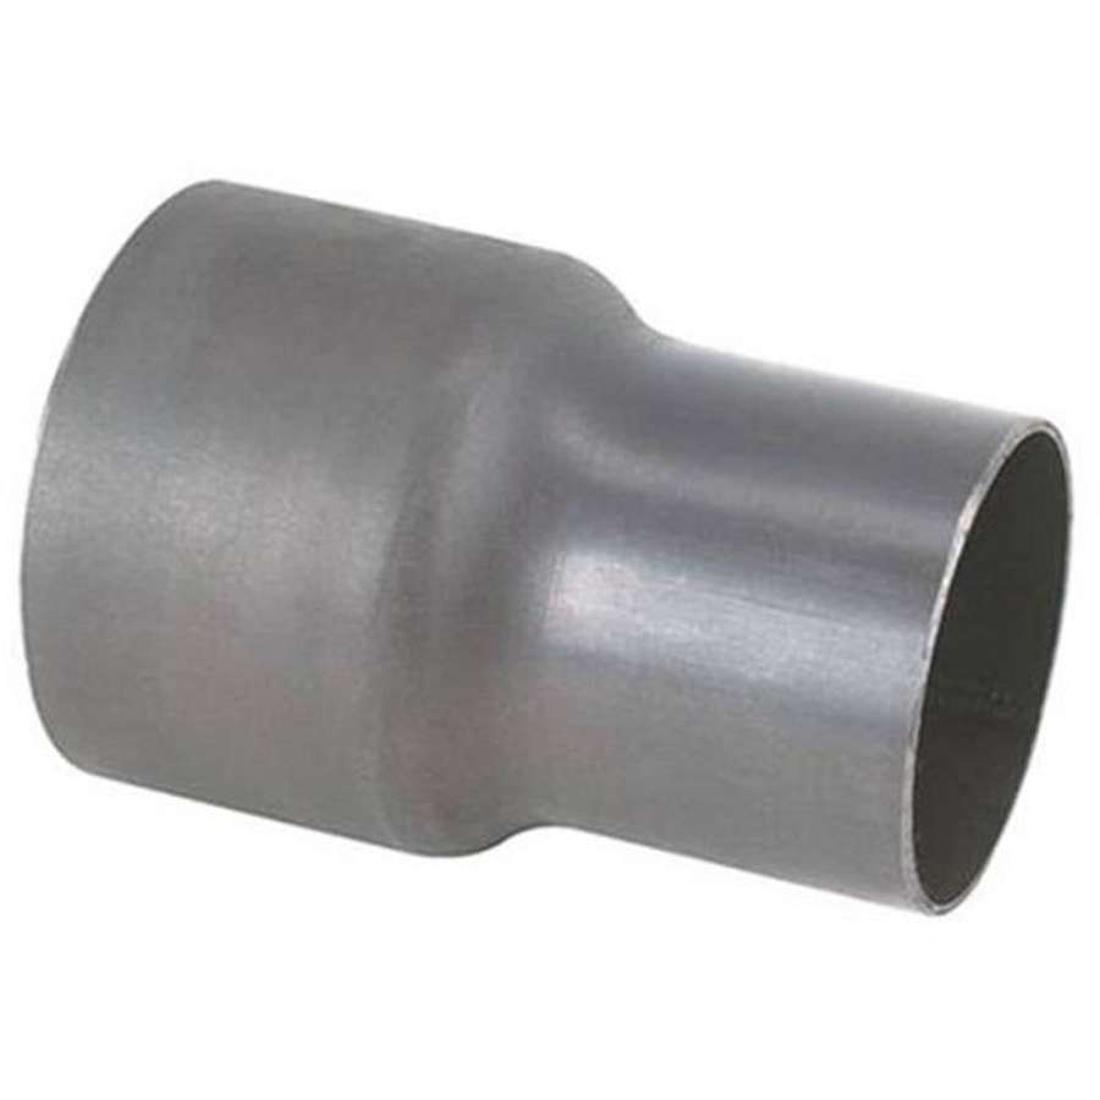 Exhaust Pipe Reducer 2" 51mm - 2.5" 63mm Mild Steel image